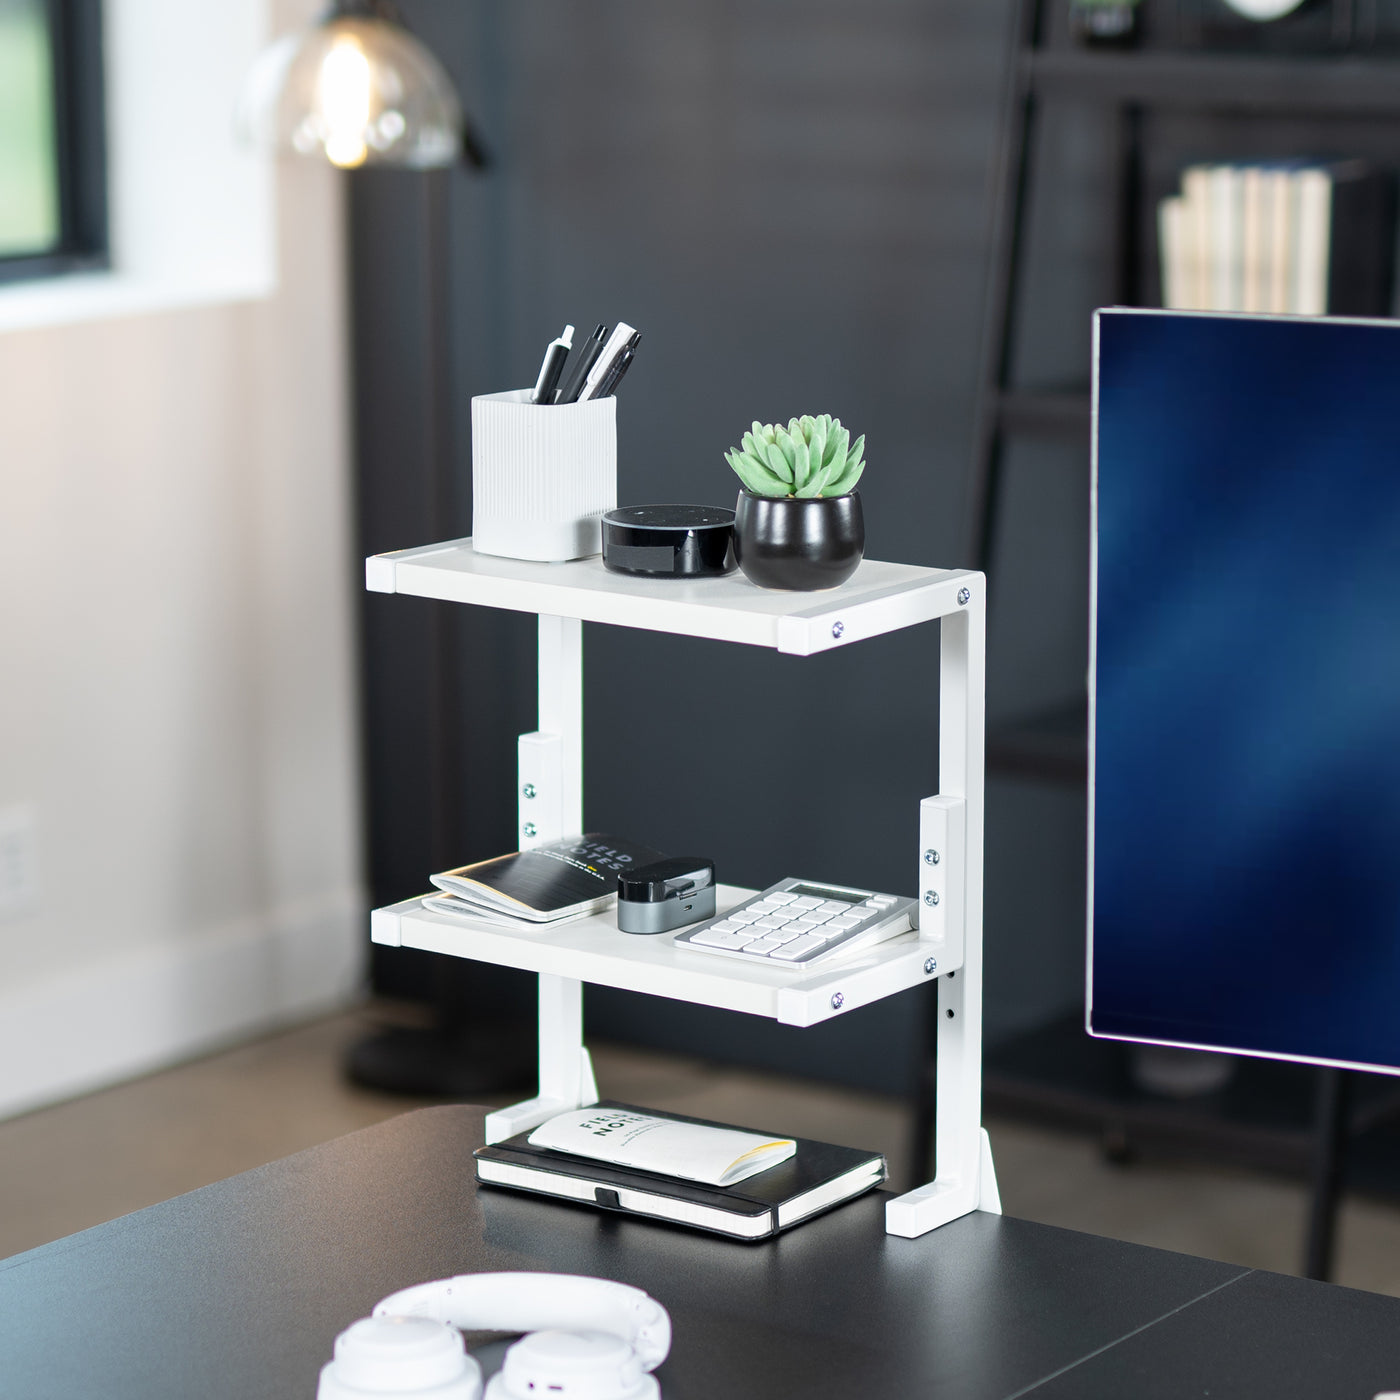 Elevate items on your desktop in an organized manner to create more desktop surface space.